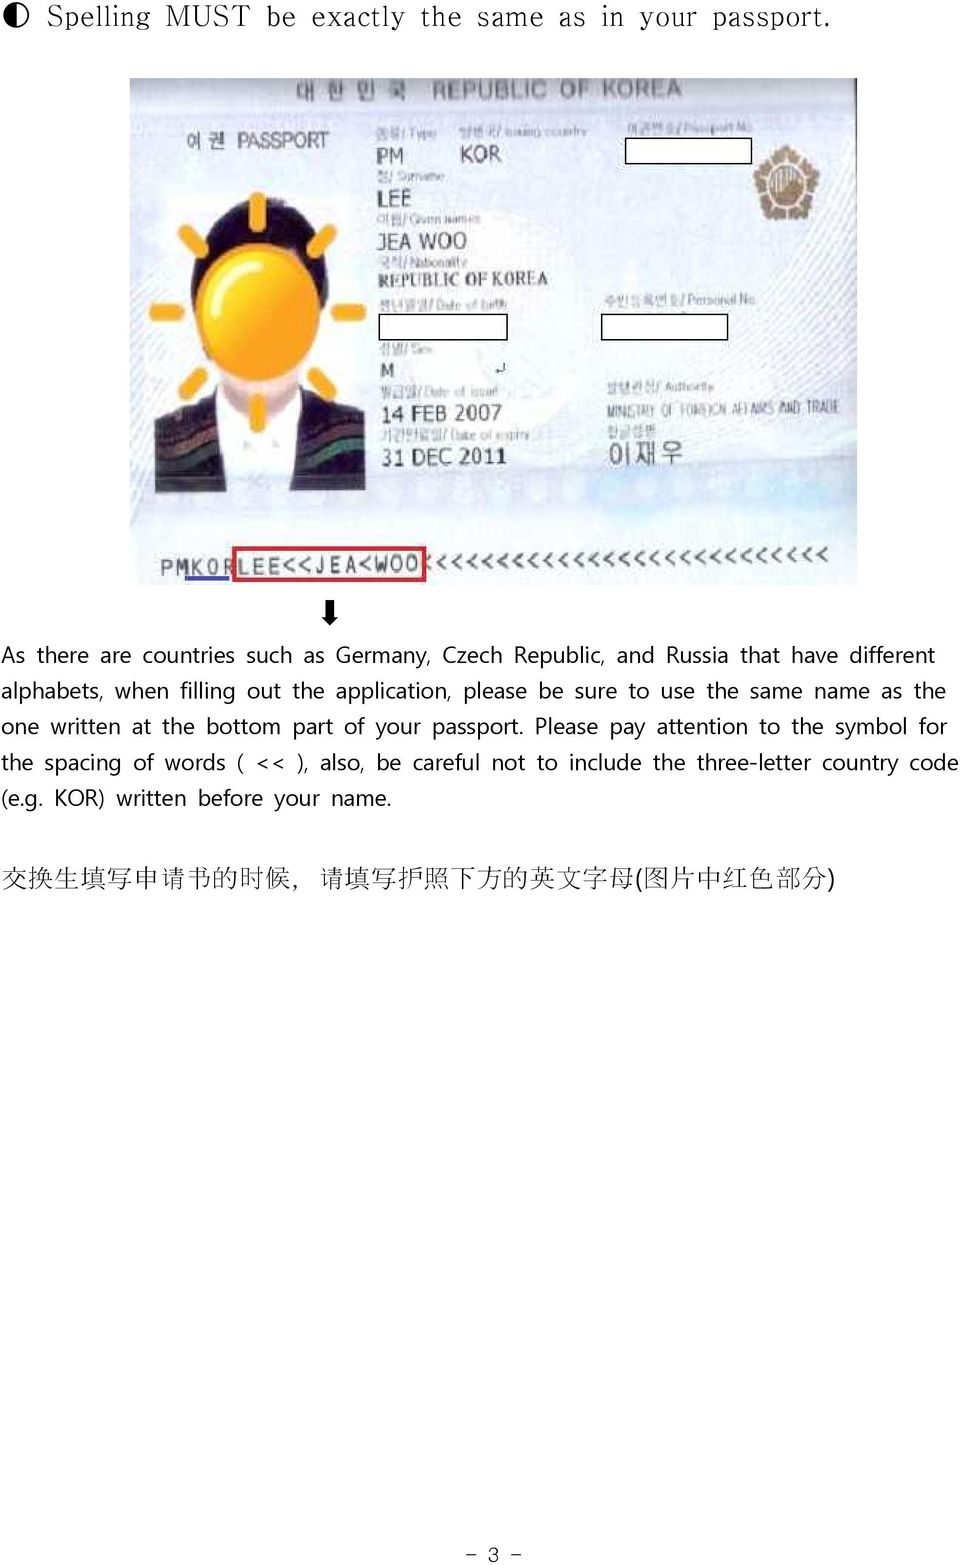 application, please be sure to use the same name as the one written at the bottom part of your passport.